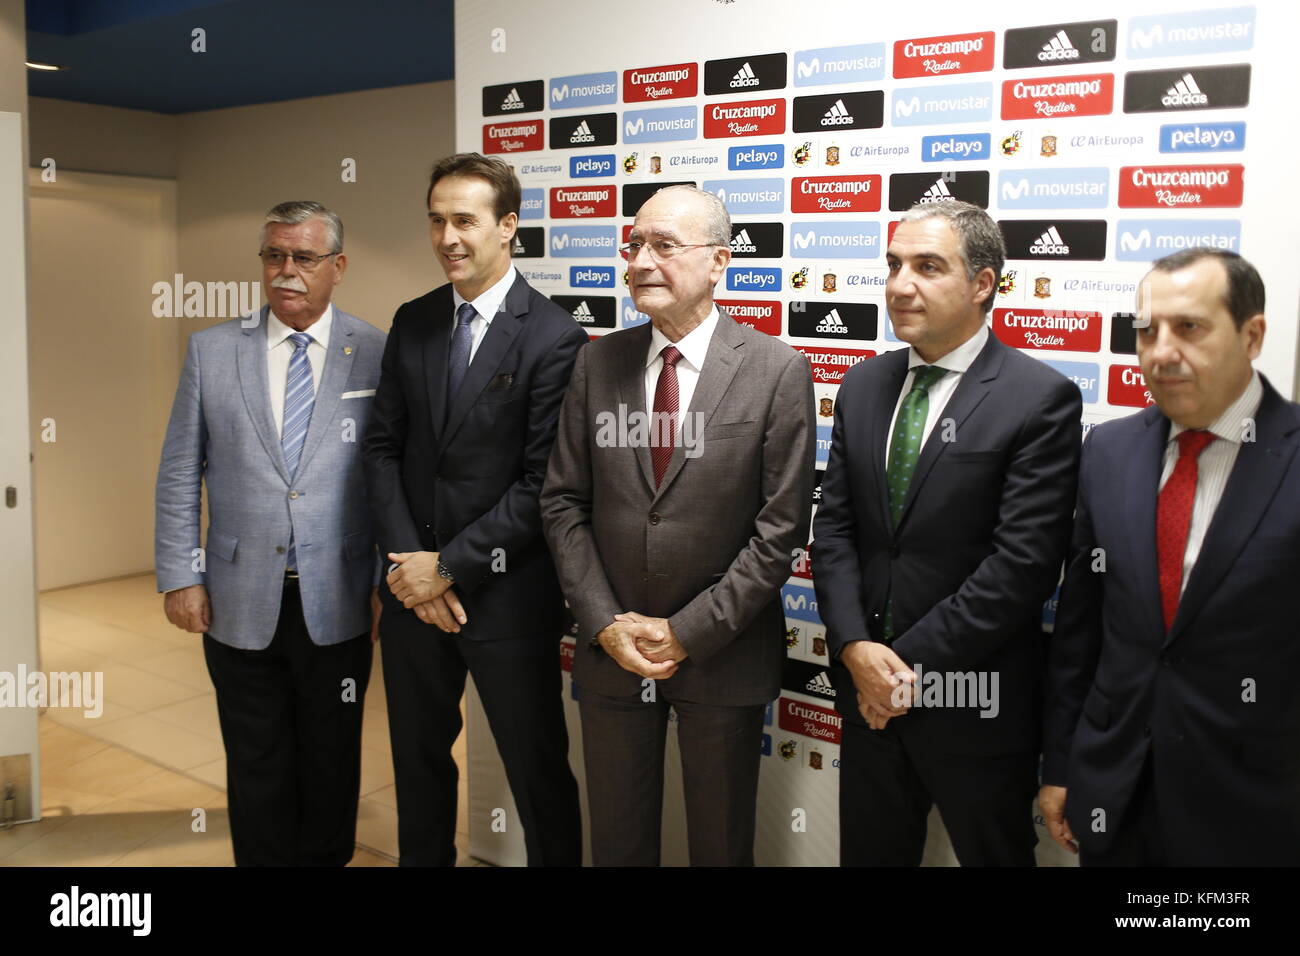 National football coach of Spain, Julen Lopetegui during the presentation of the game against Costa Rica on November 11 in the stadium of la Rosaleda. 30/10/2017 Credit: Gtres Información más Comuniación on line, S.L./Alamy Live News Stock Photo